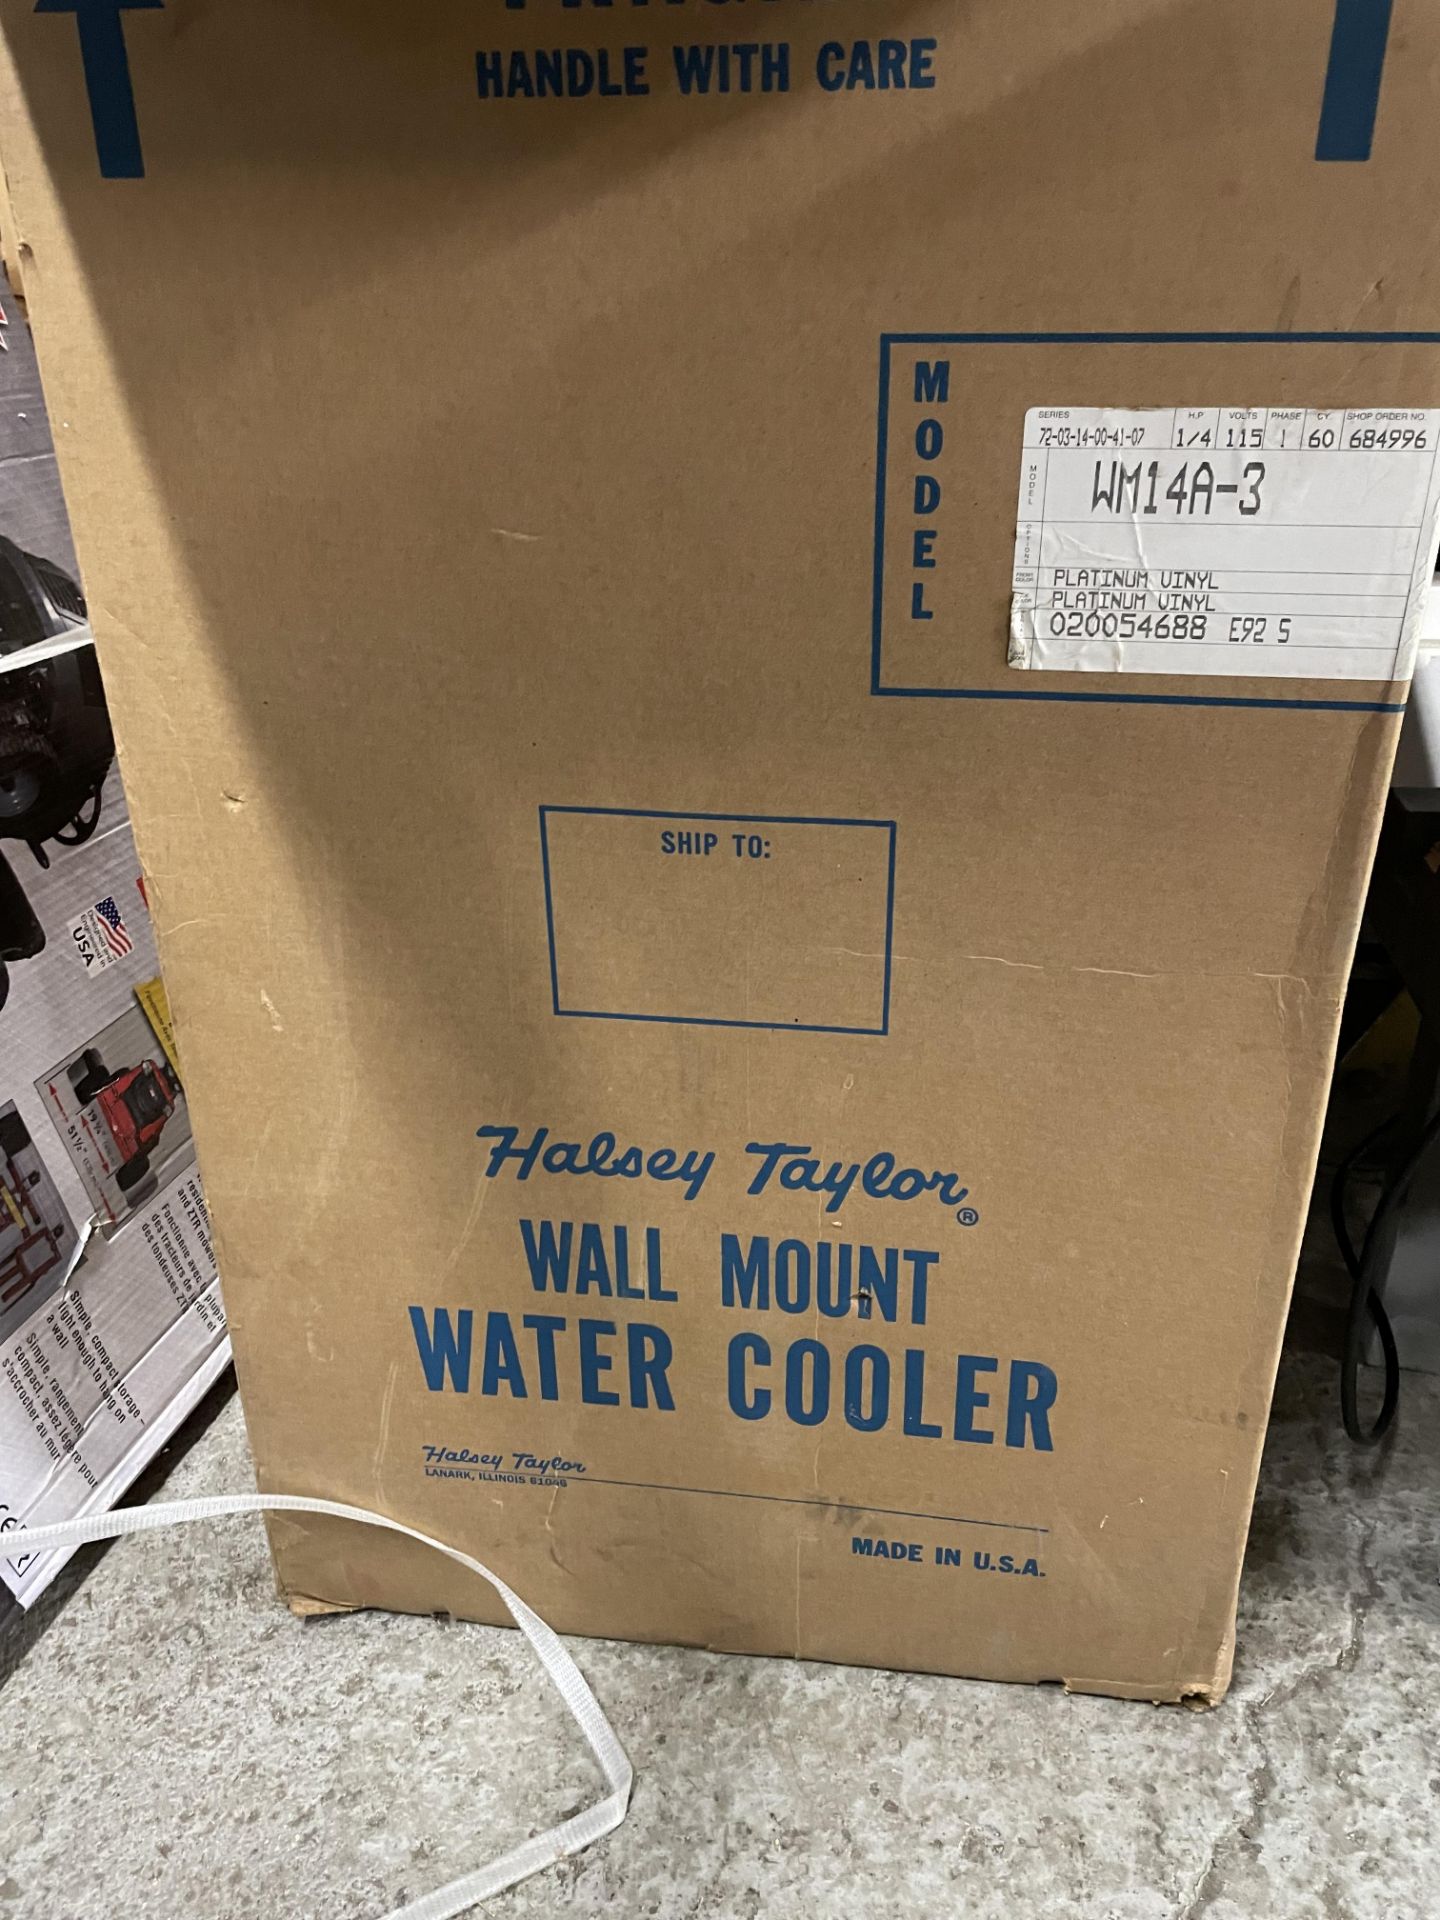 New Halsey Taylor # WM14A-3 Wall Mount Water Cooler